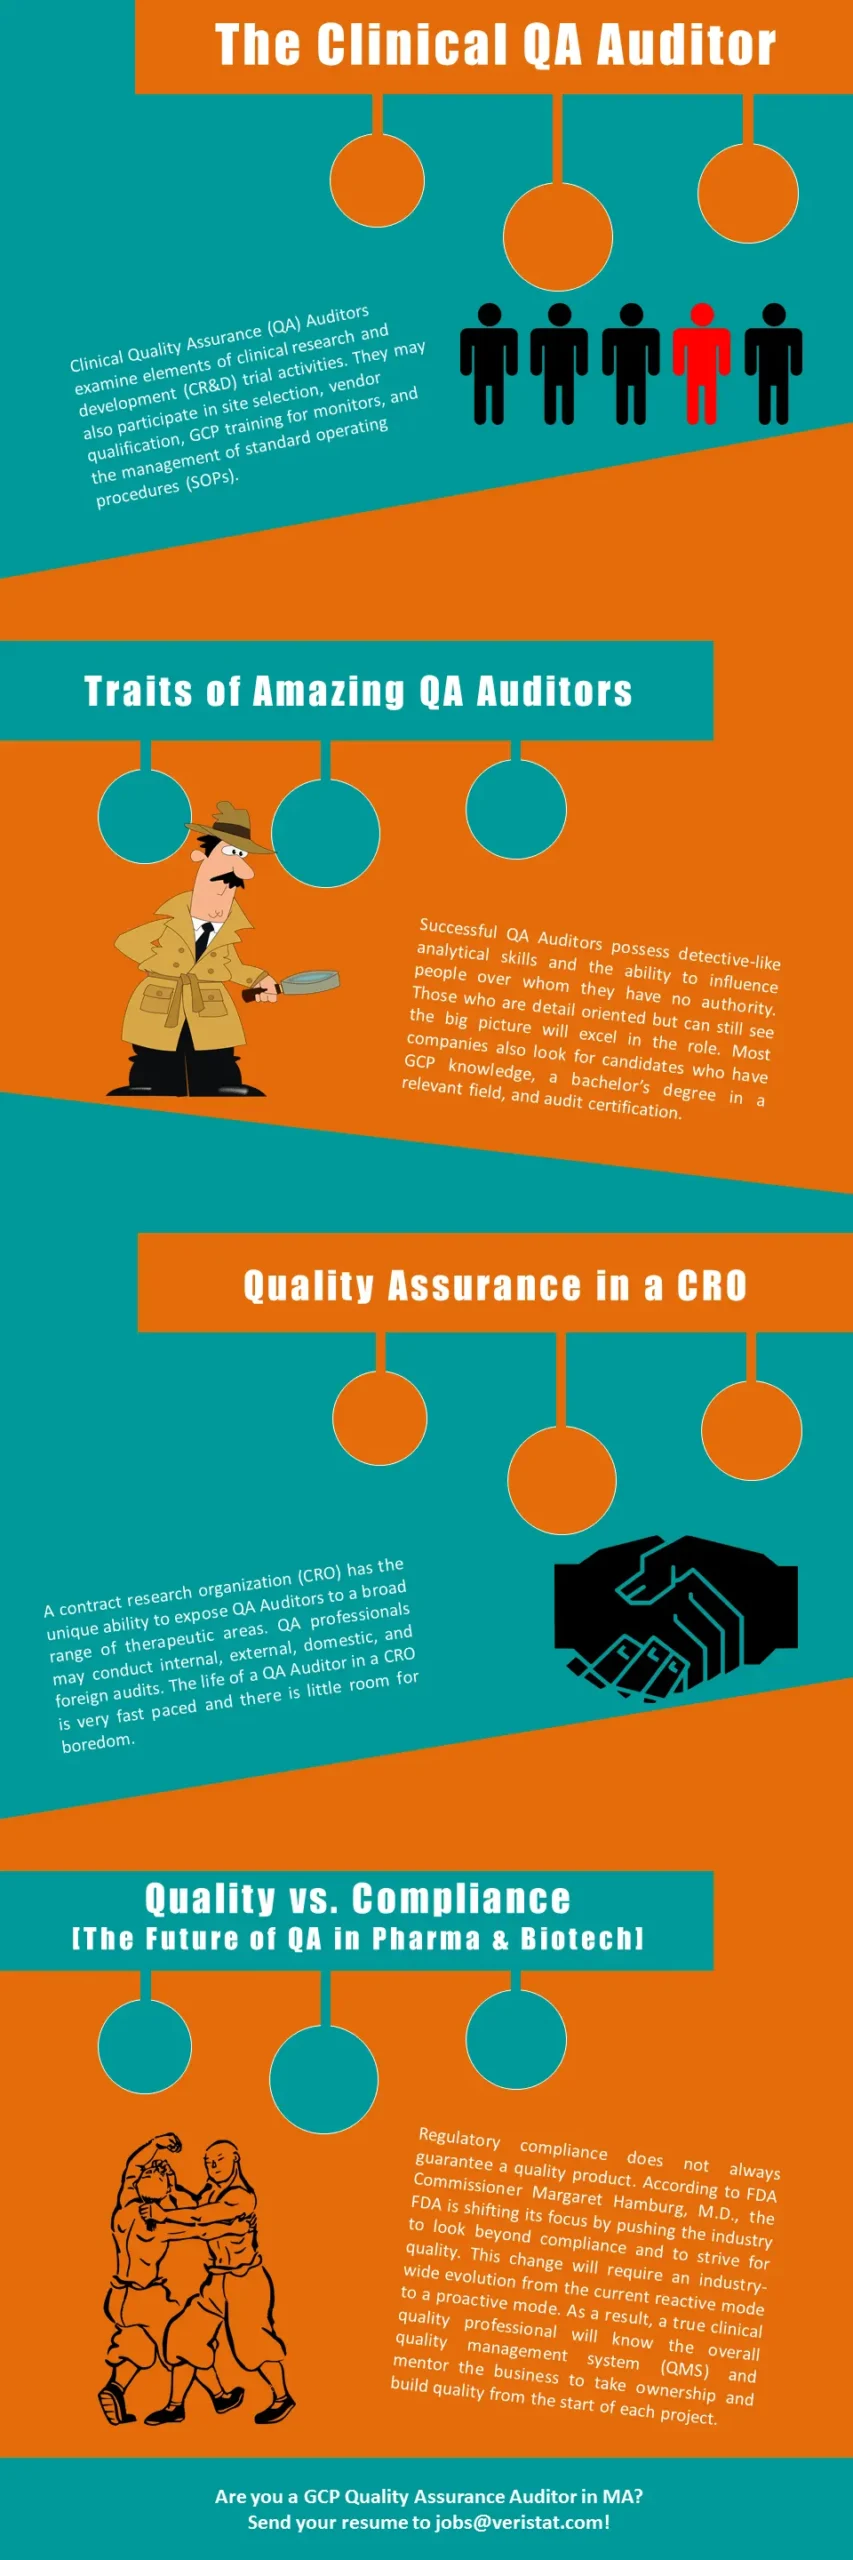 quality assurance auditor jobs - What does a quality assurance auditor do